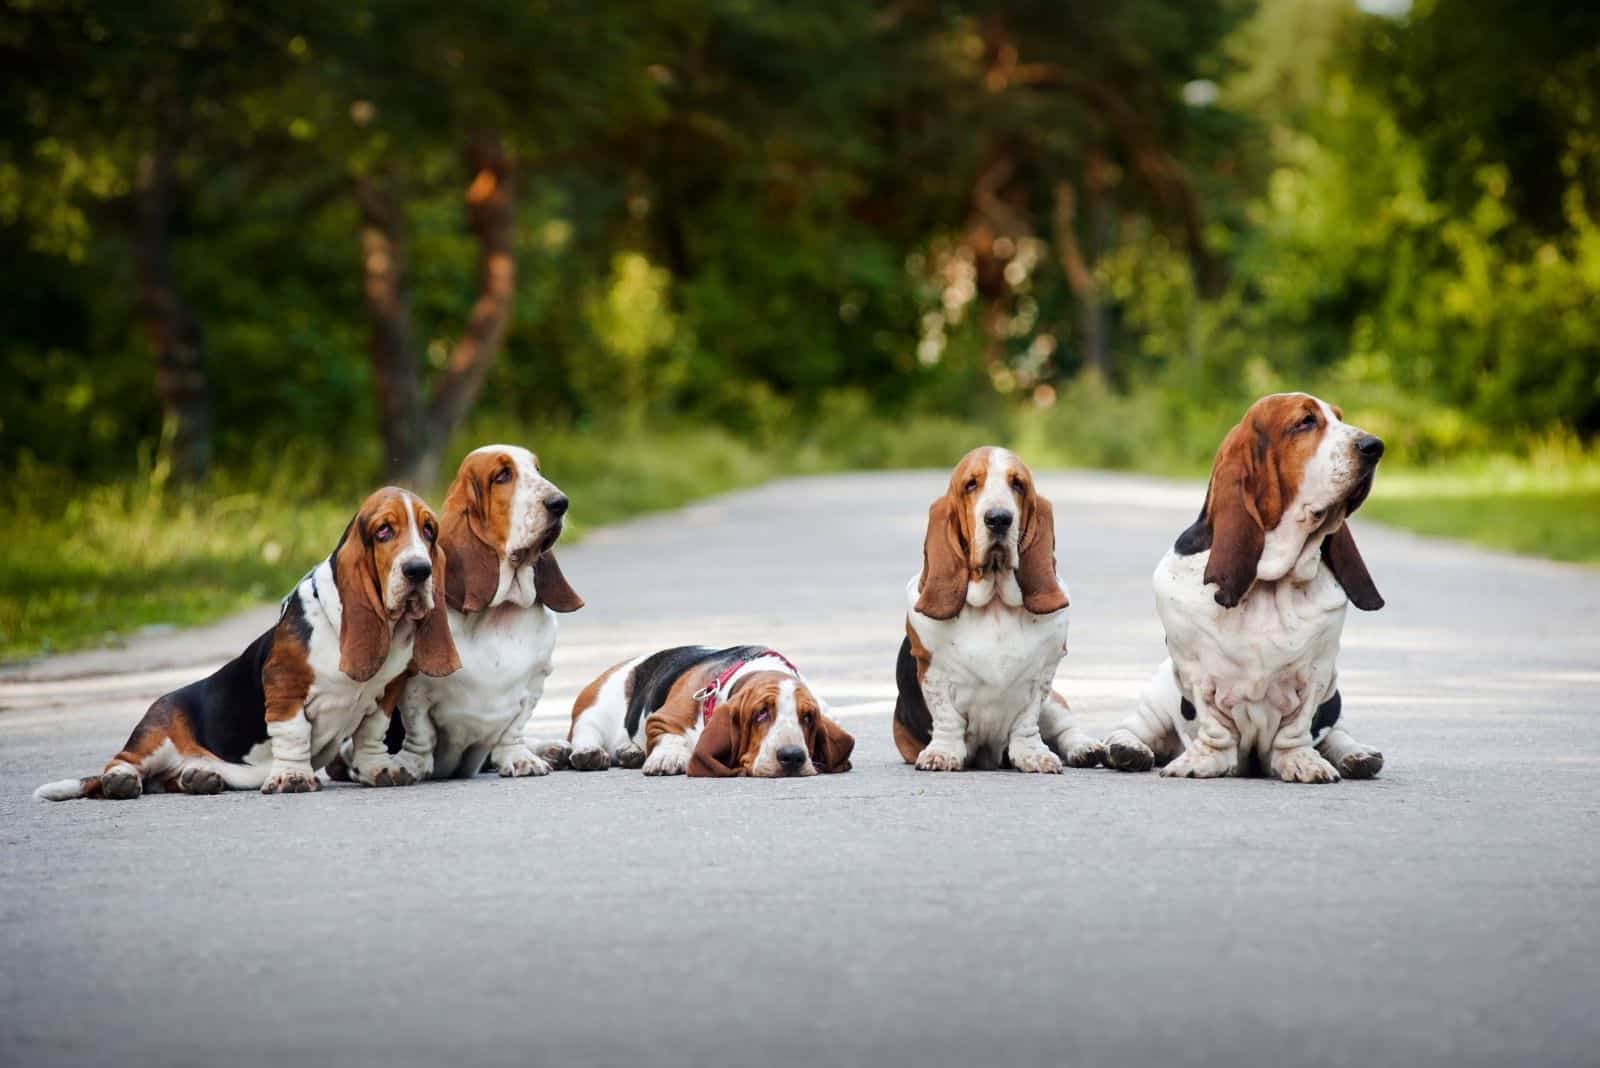 group of dogs basset hound lining up across the road